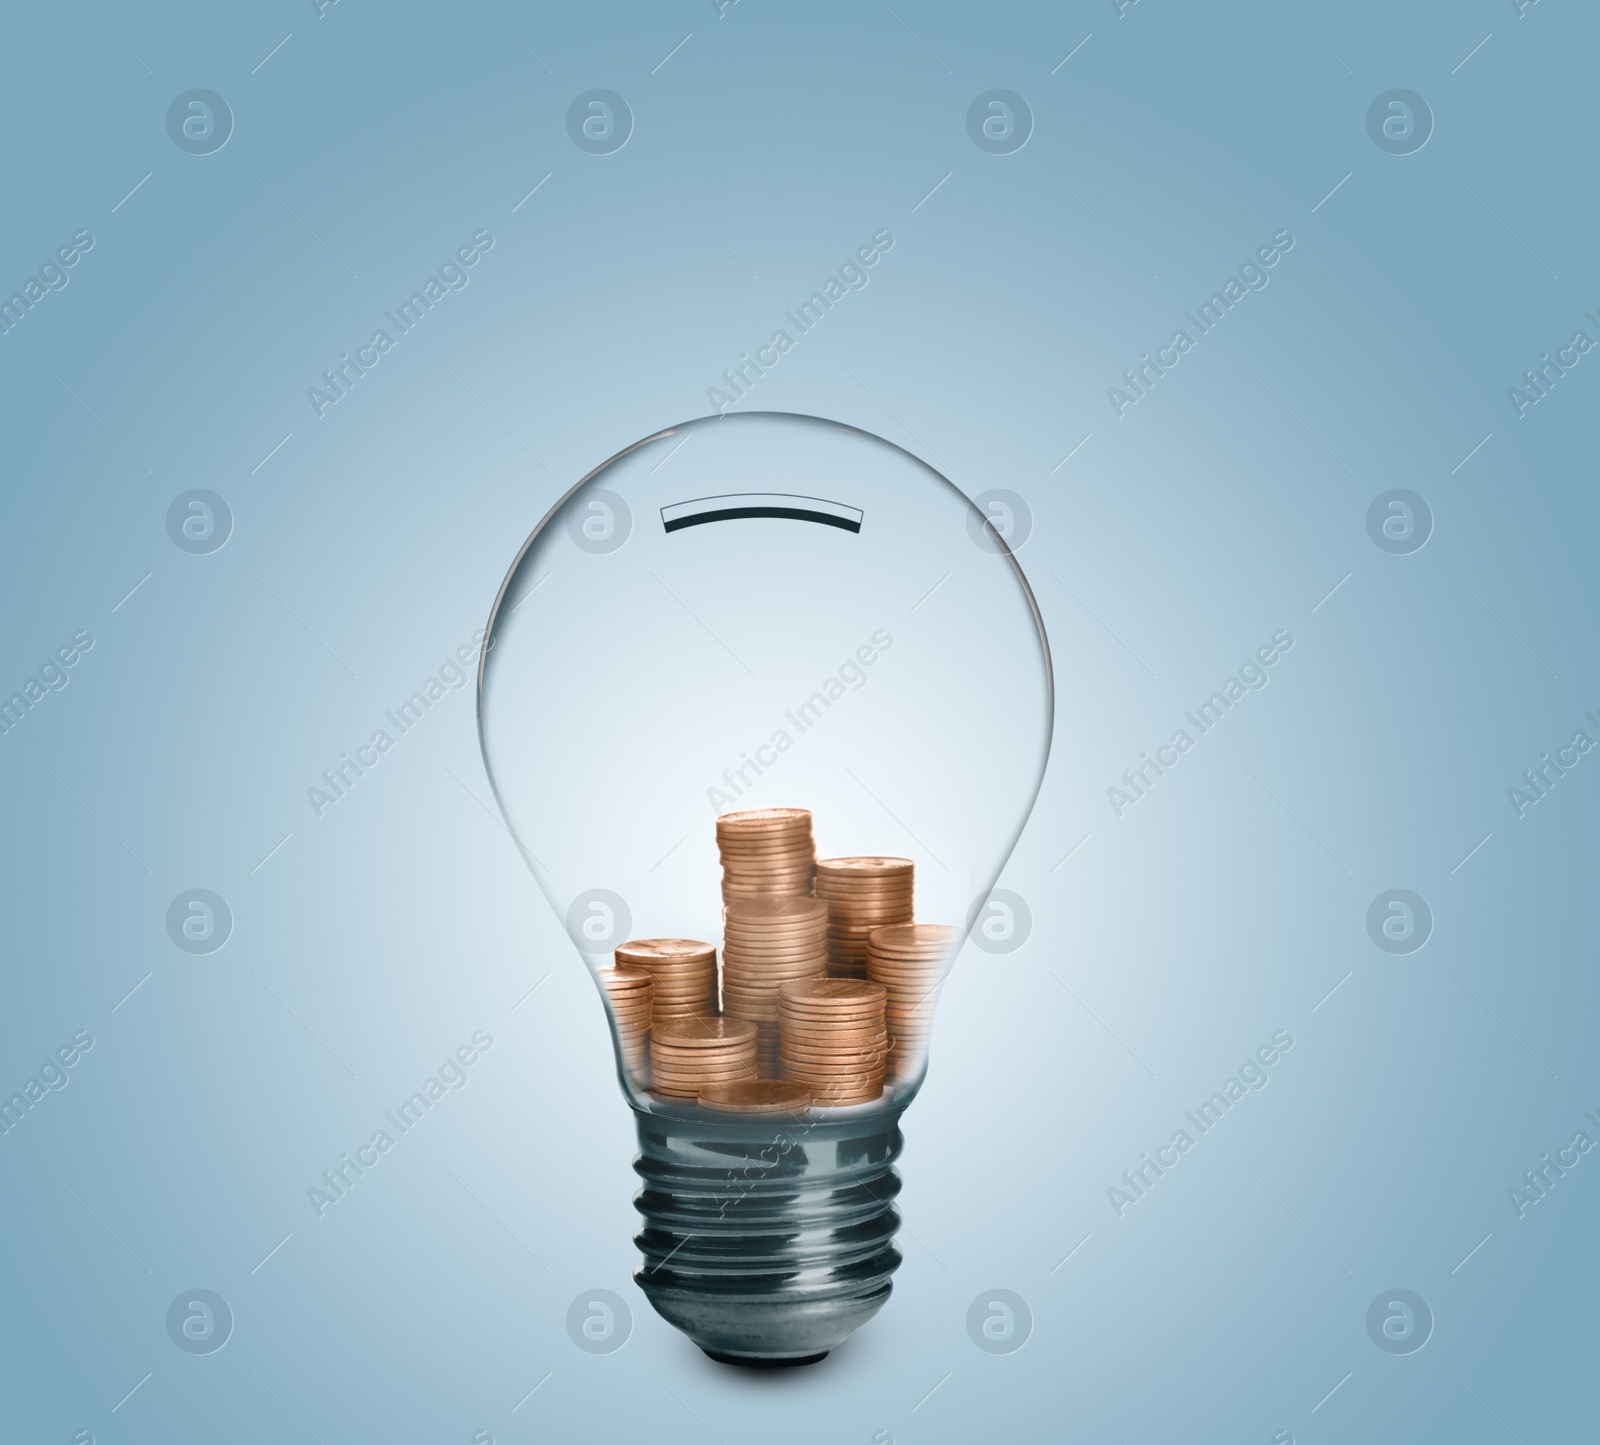 Image of Light bulb with stacked coins inside on light blue background. Energy efficiency, loan, property or business idea concepts